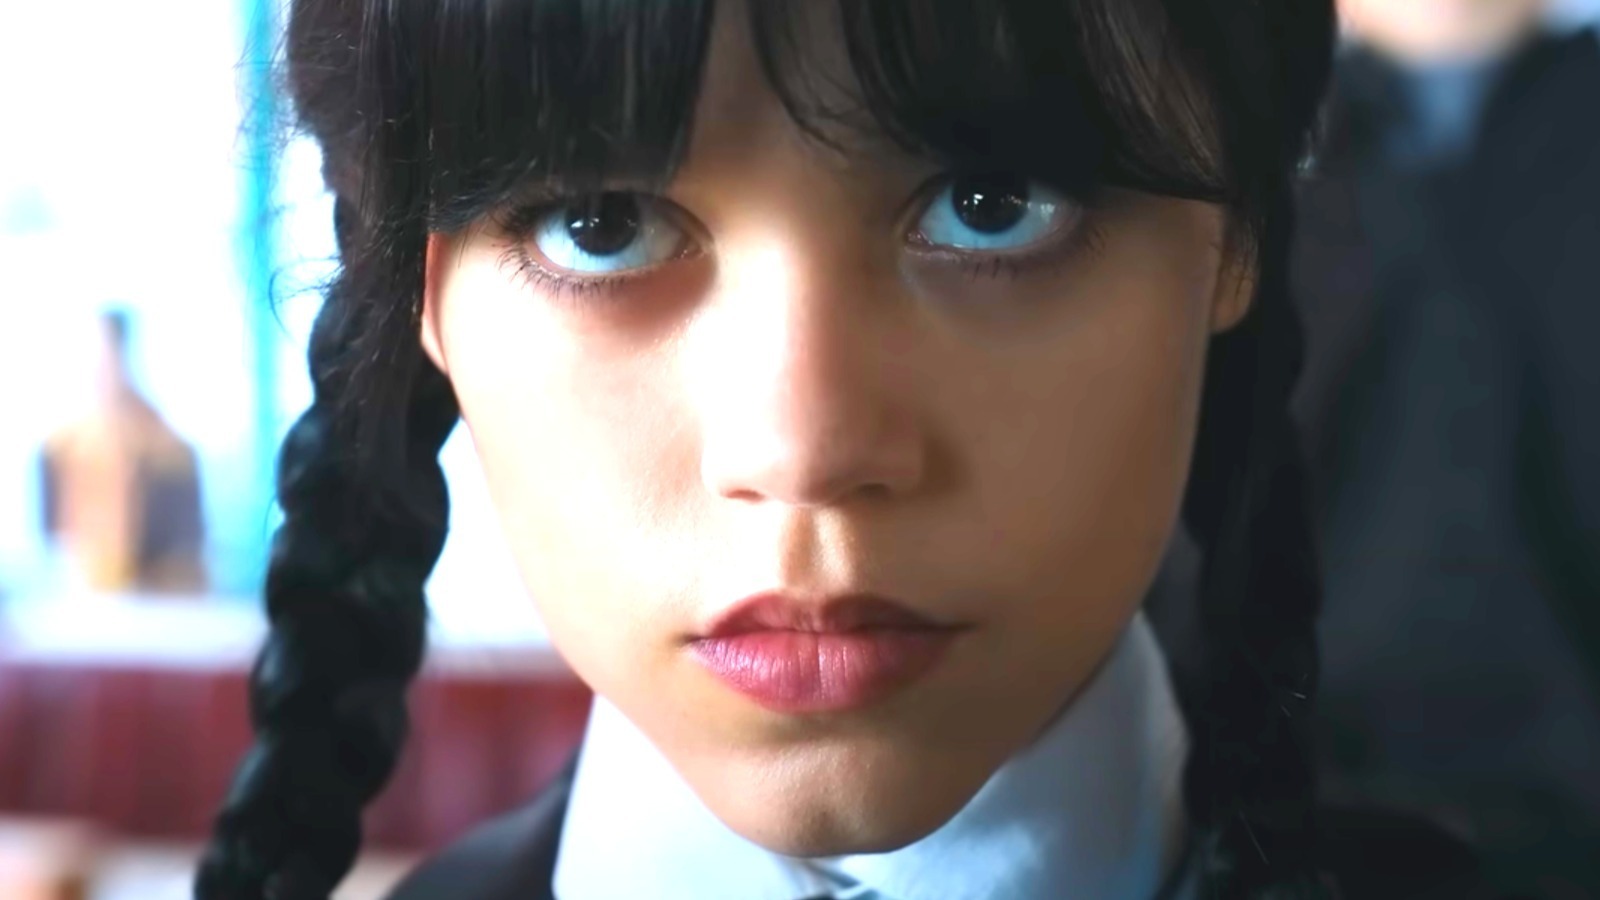 Why is Netflix Giving Us a Wednesday Addams Who Wants to Feel Feels?